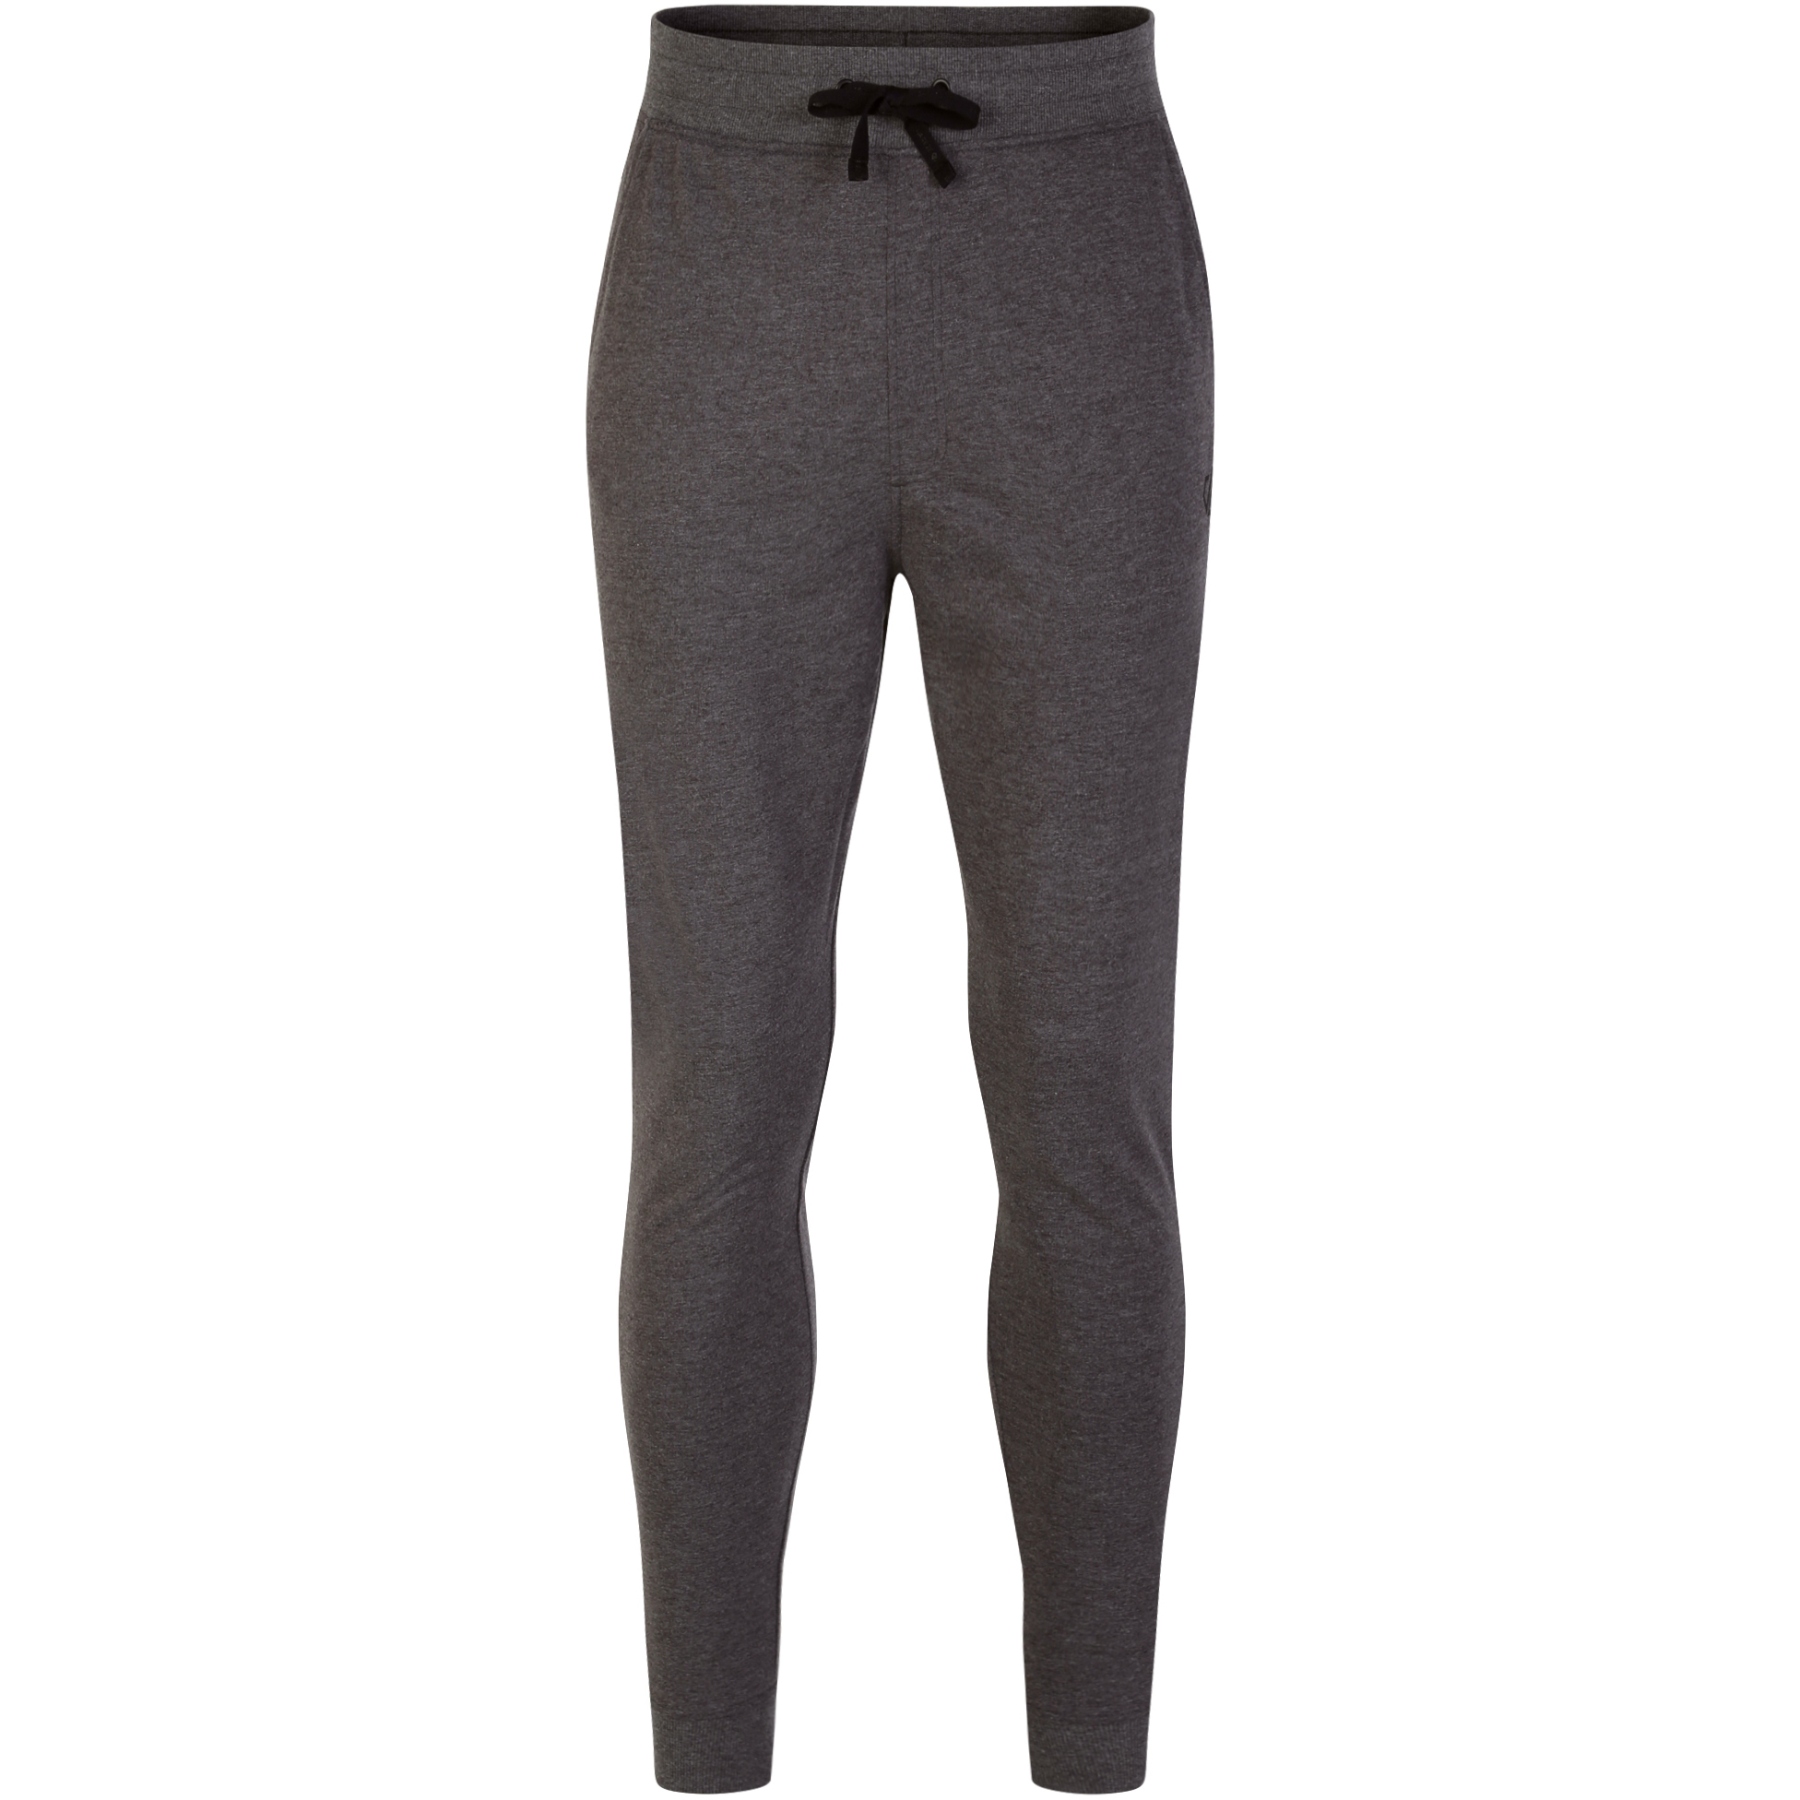 Picture of Dare 2b Recharging Jogger - R39 Charcoal/Grey Marl